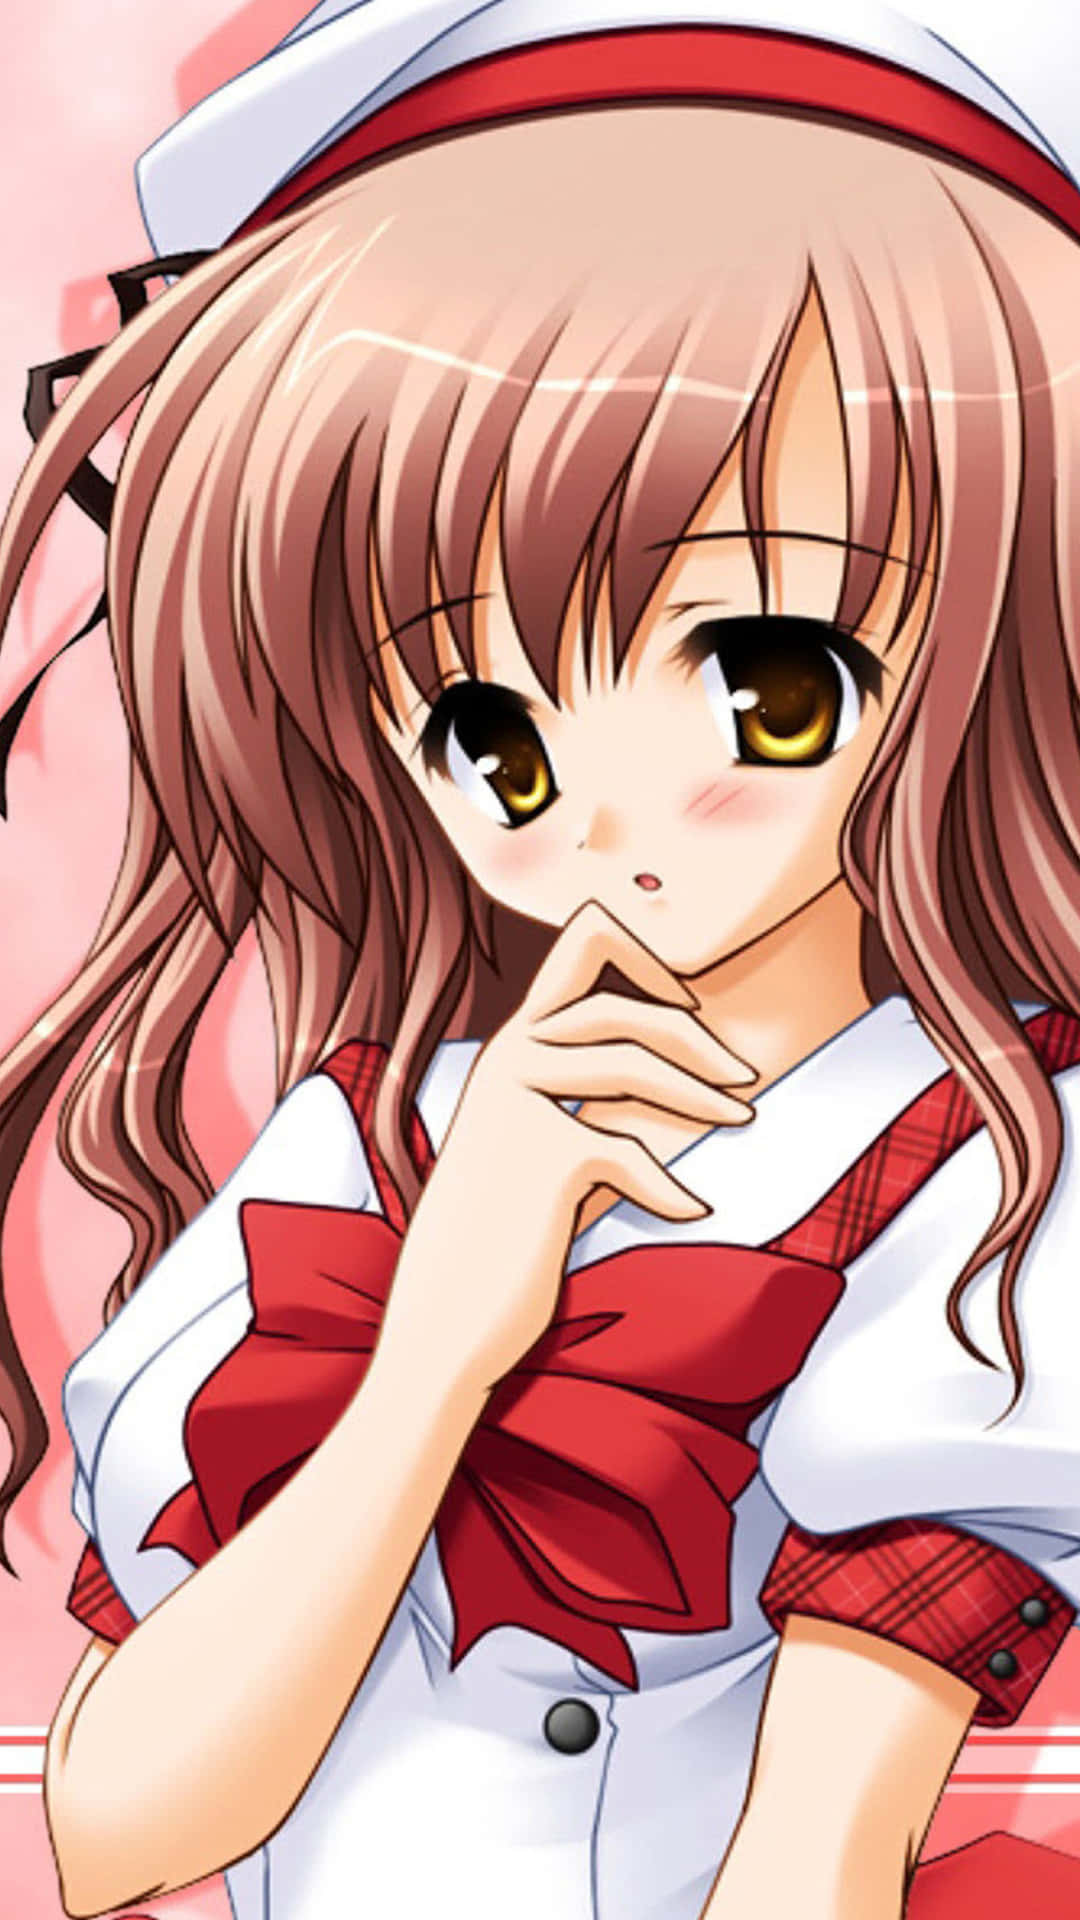 A Girl In A White Uniform With A Pink Bow Wallpaper